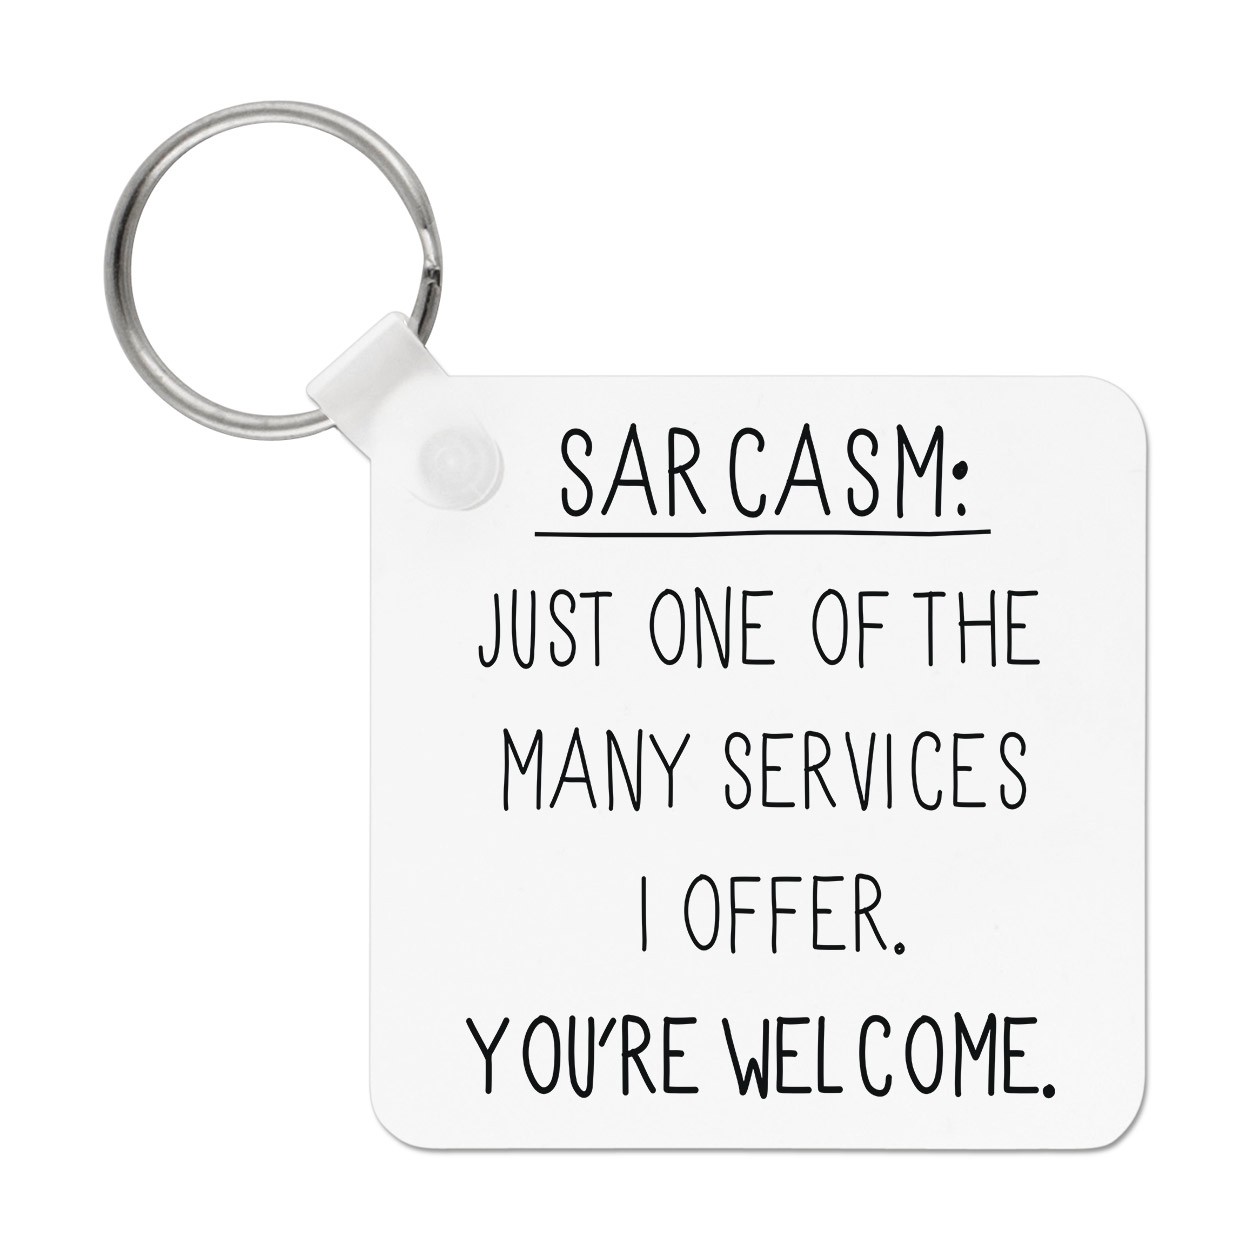 Sarcasm One Of The Many Services Keyring Key Chain